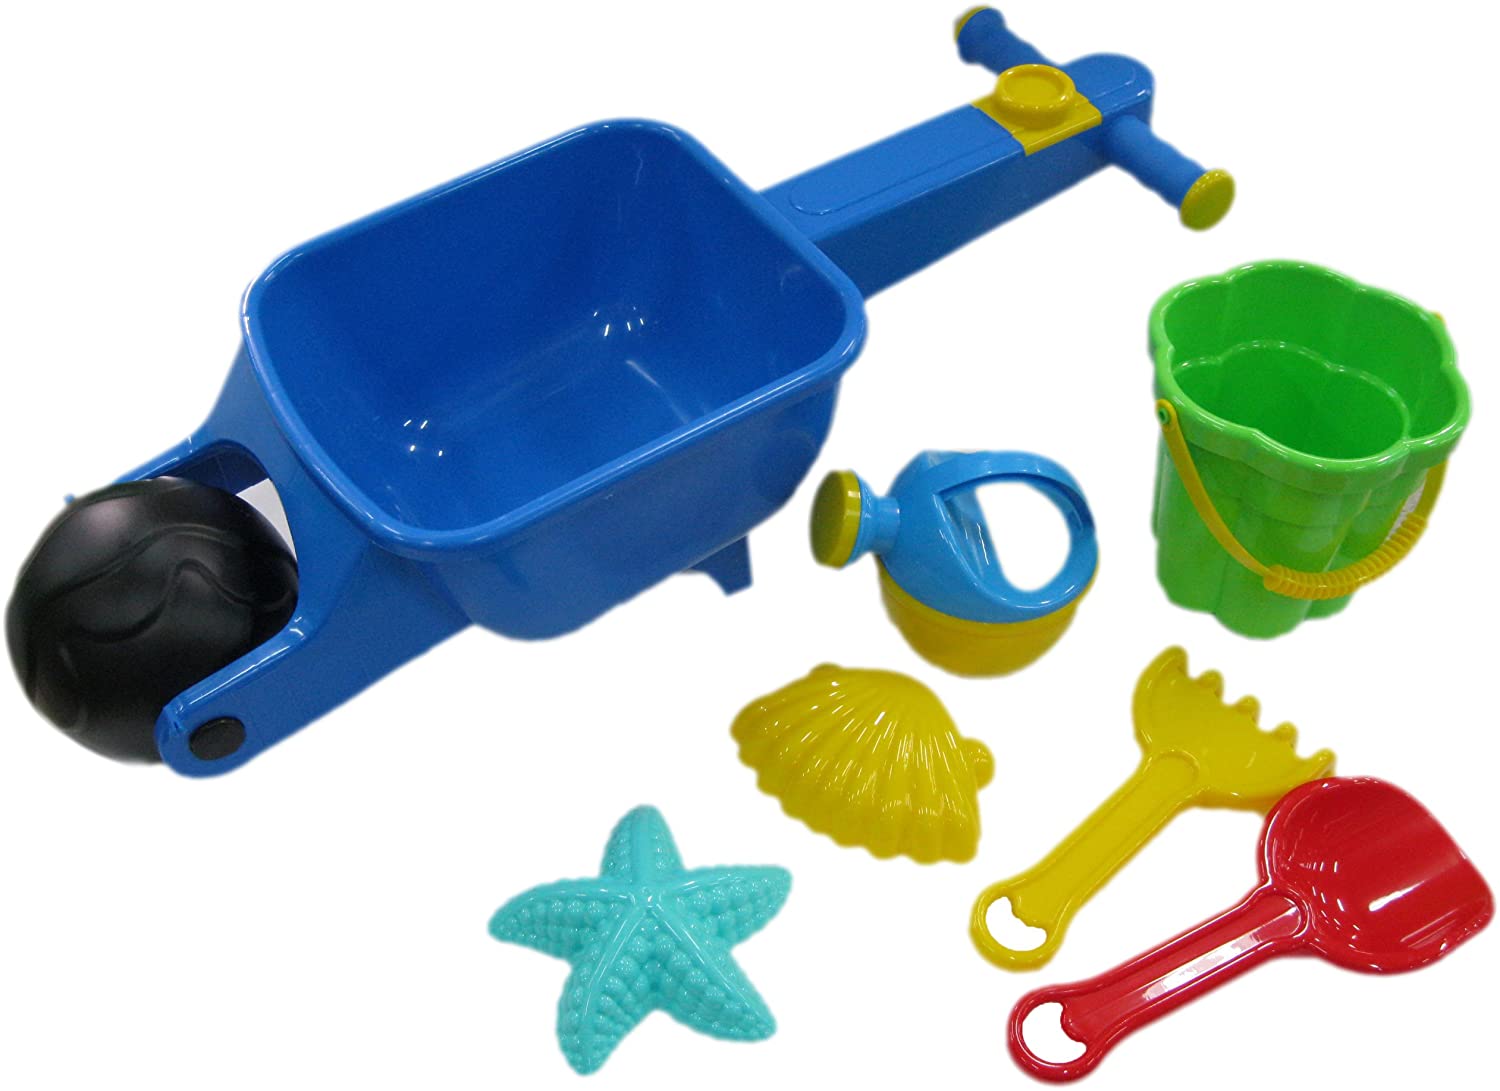 Wheelbarrow Small With Bucket Set Flower And Watering Can Small 7 Pieces (S